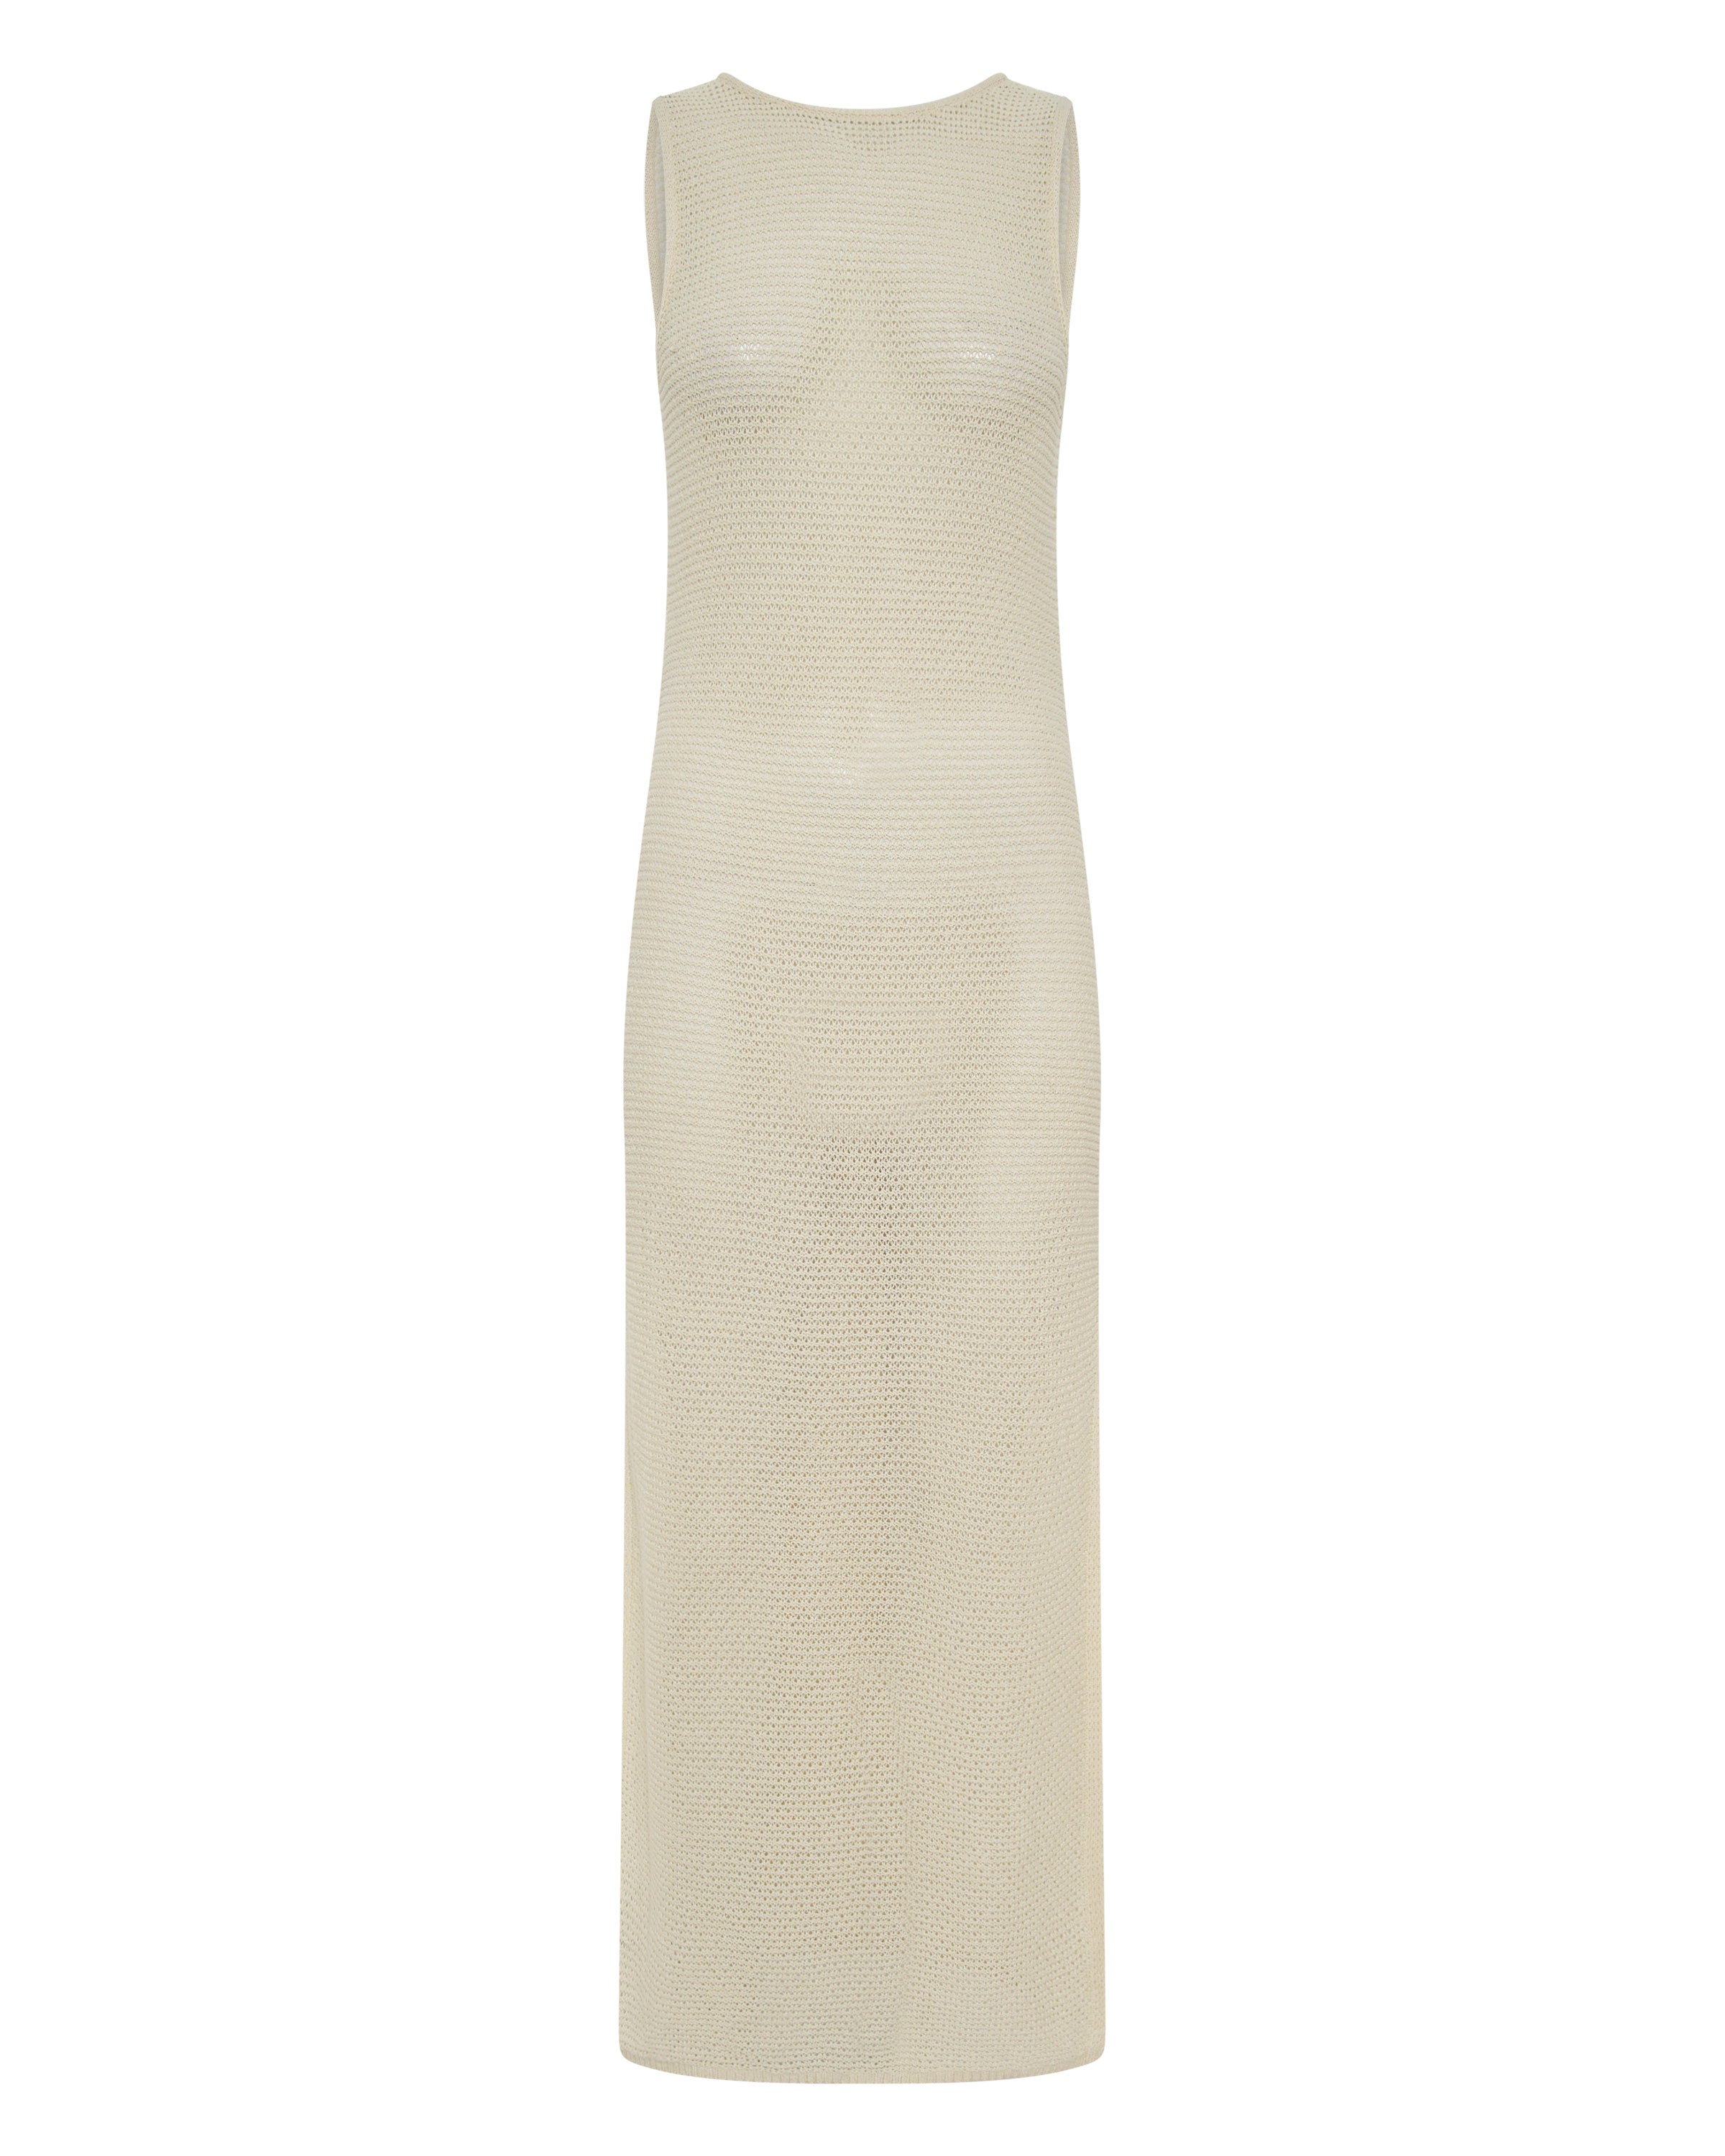 MATISSE KNITTED SCOOPED BACK DRESS IN CREAM